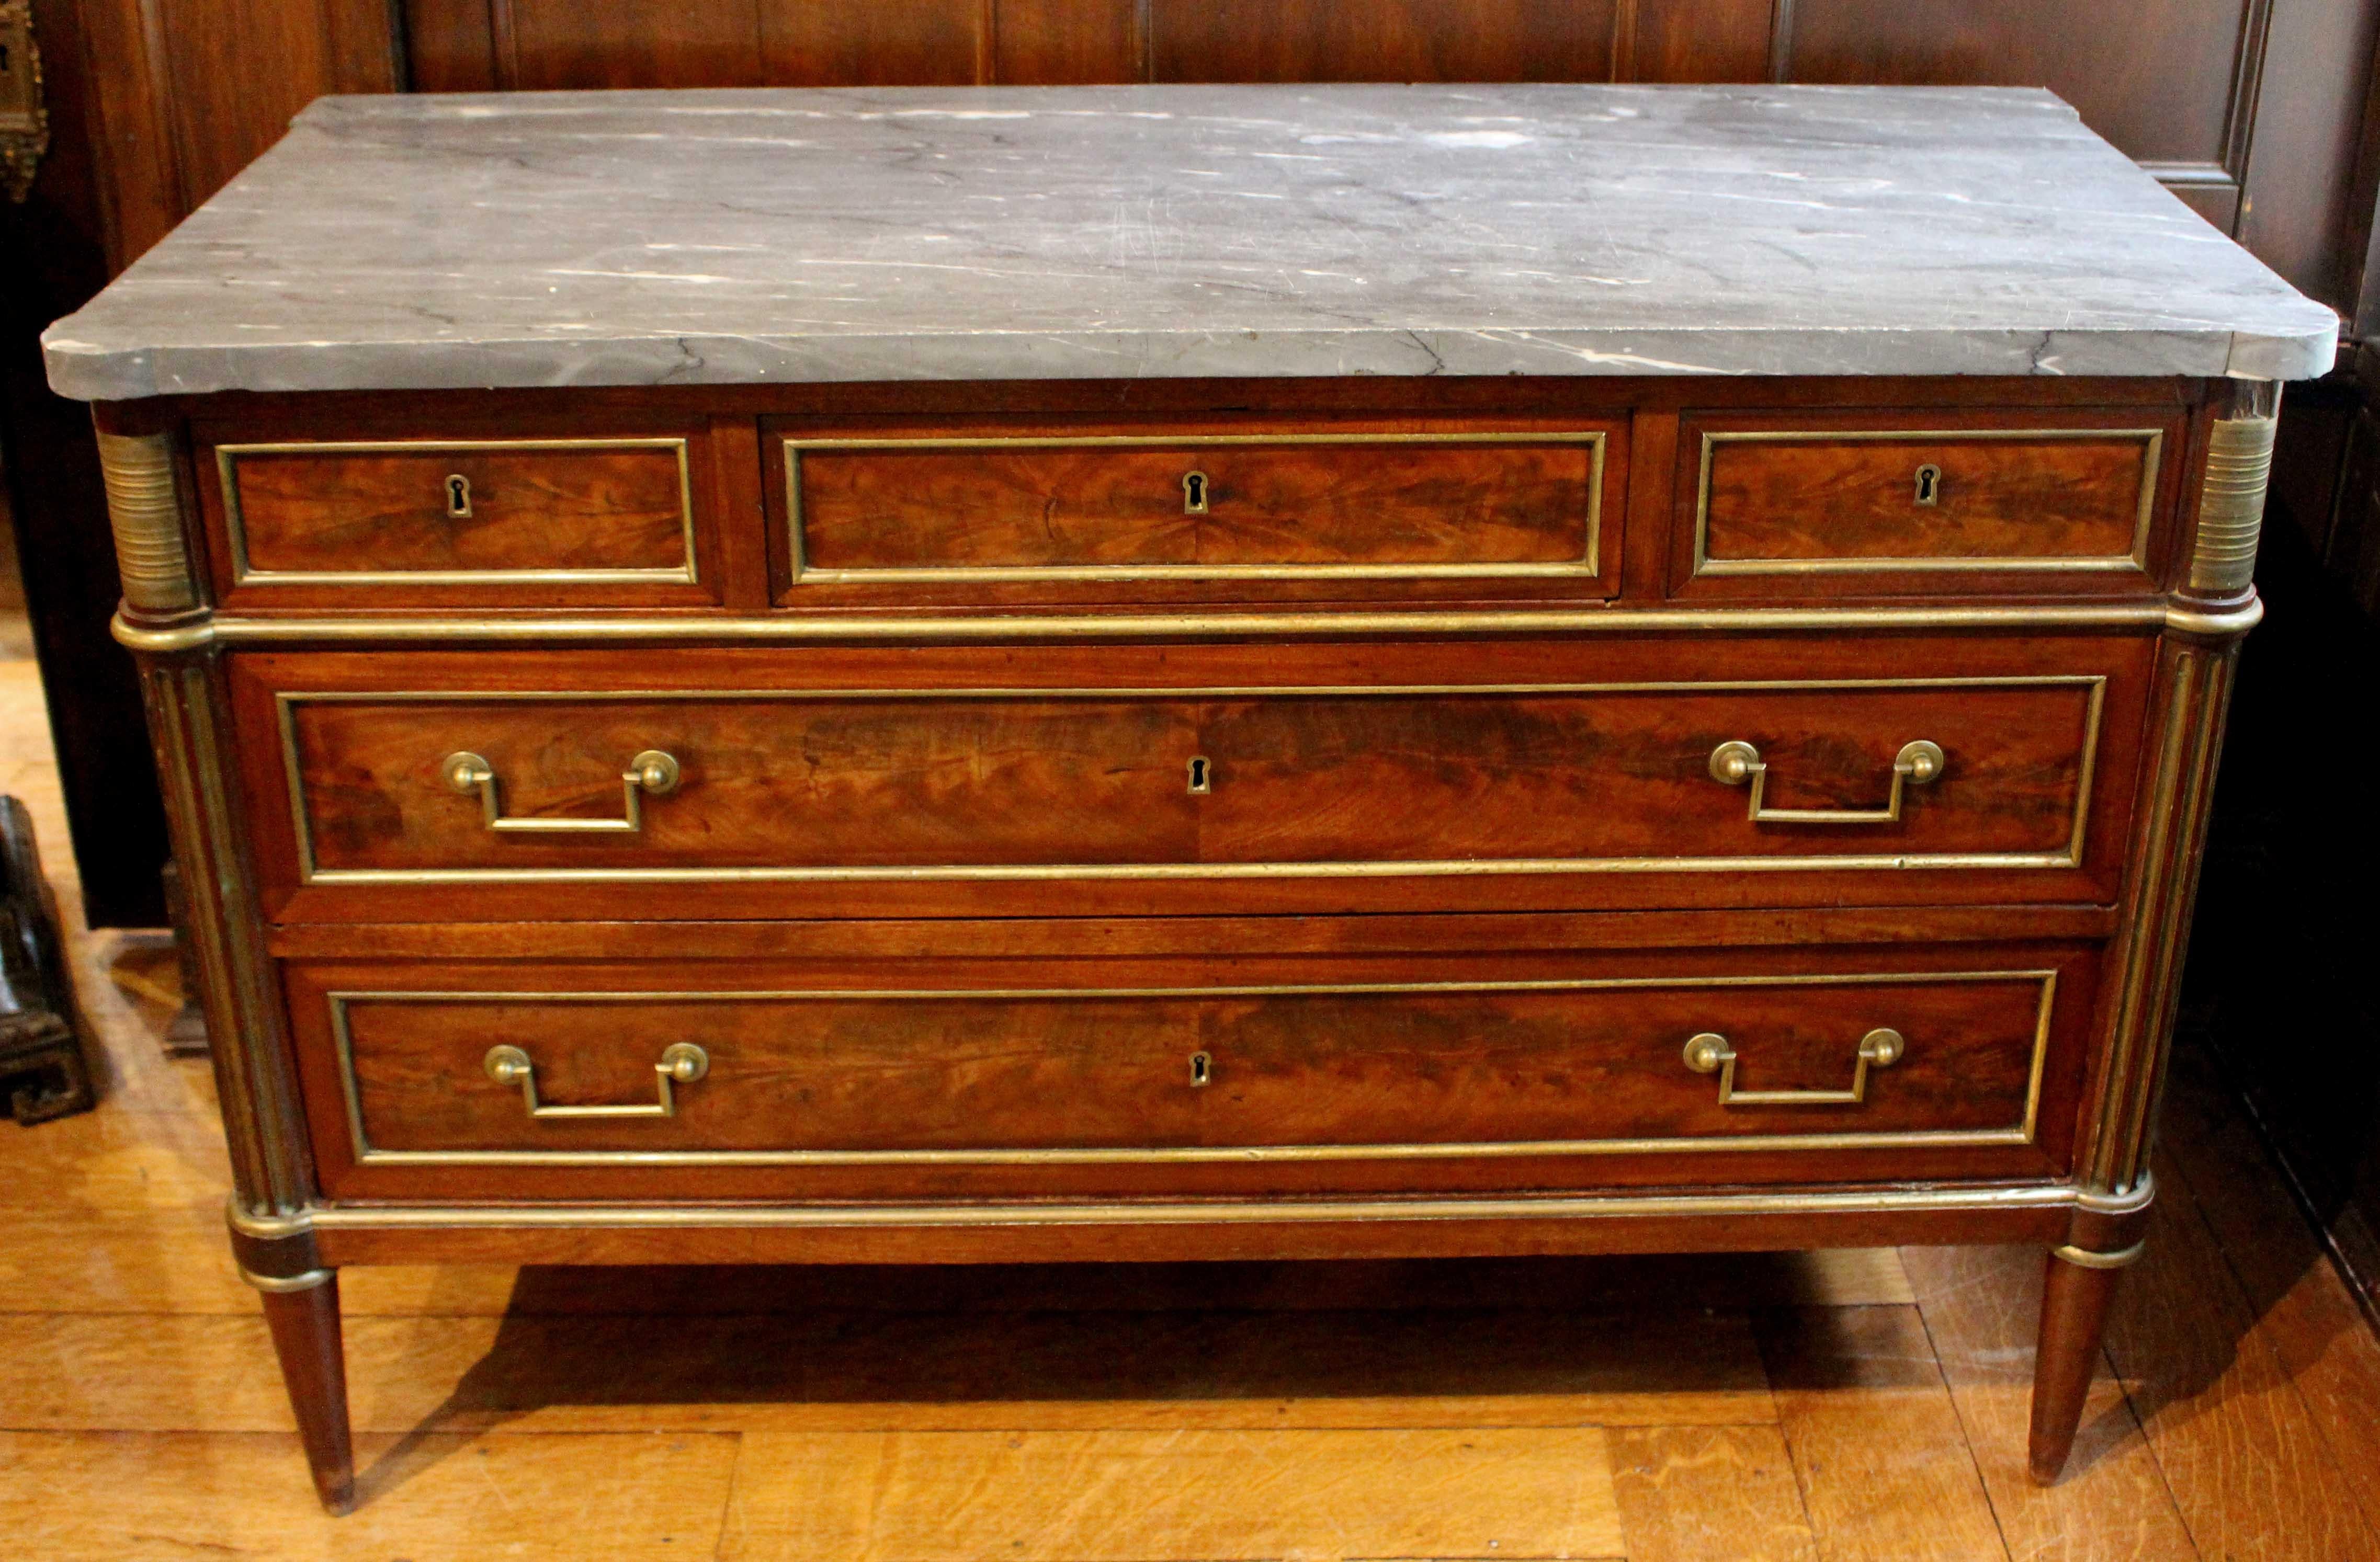 Late 18th century Louis XVI commode, French. Rare blue marble top cut with rounded front corners and outset back to follow the lines of the piece. 3 short over 2 long drawers. Each drawer & side panel with bronze moldings. Bronze mounts in the